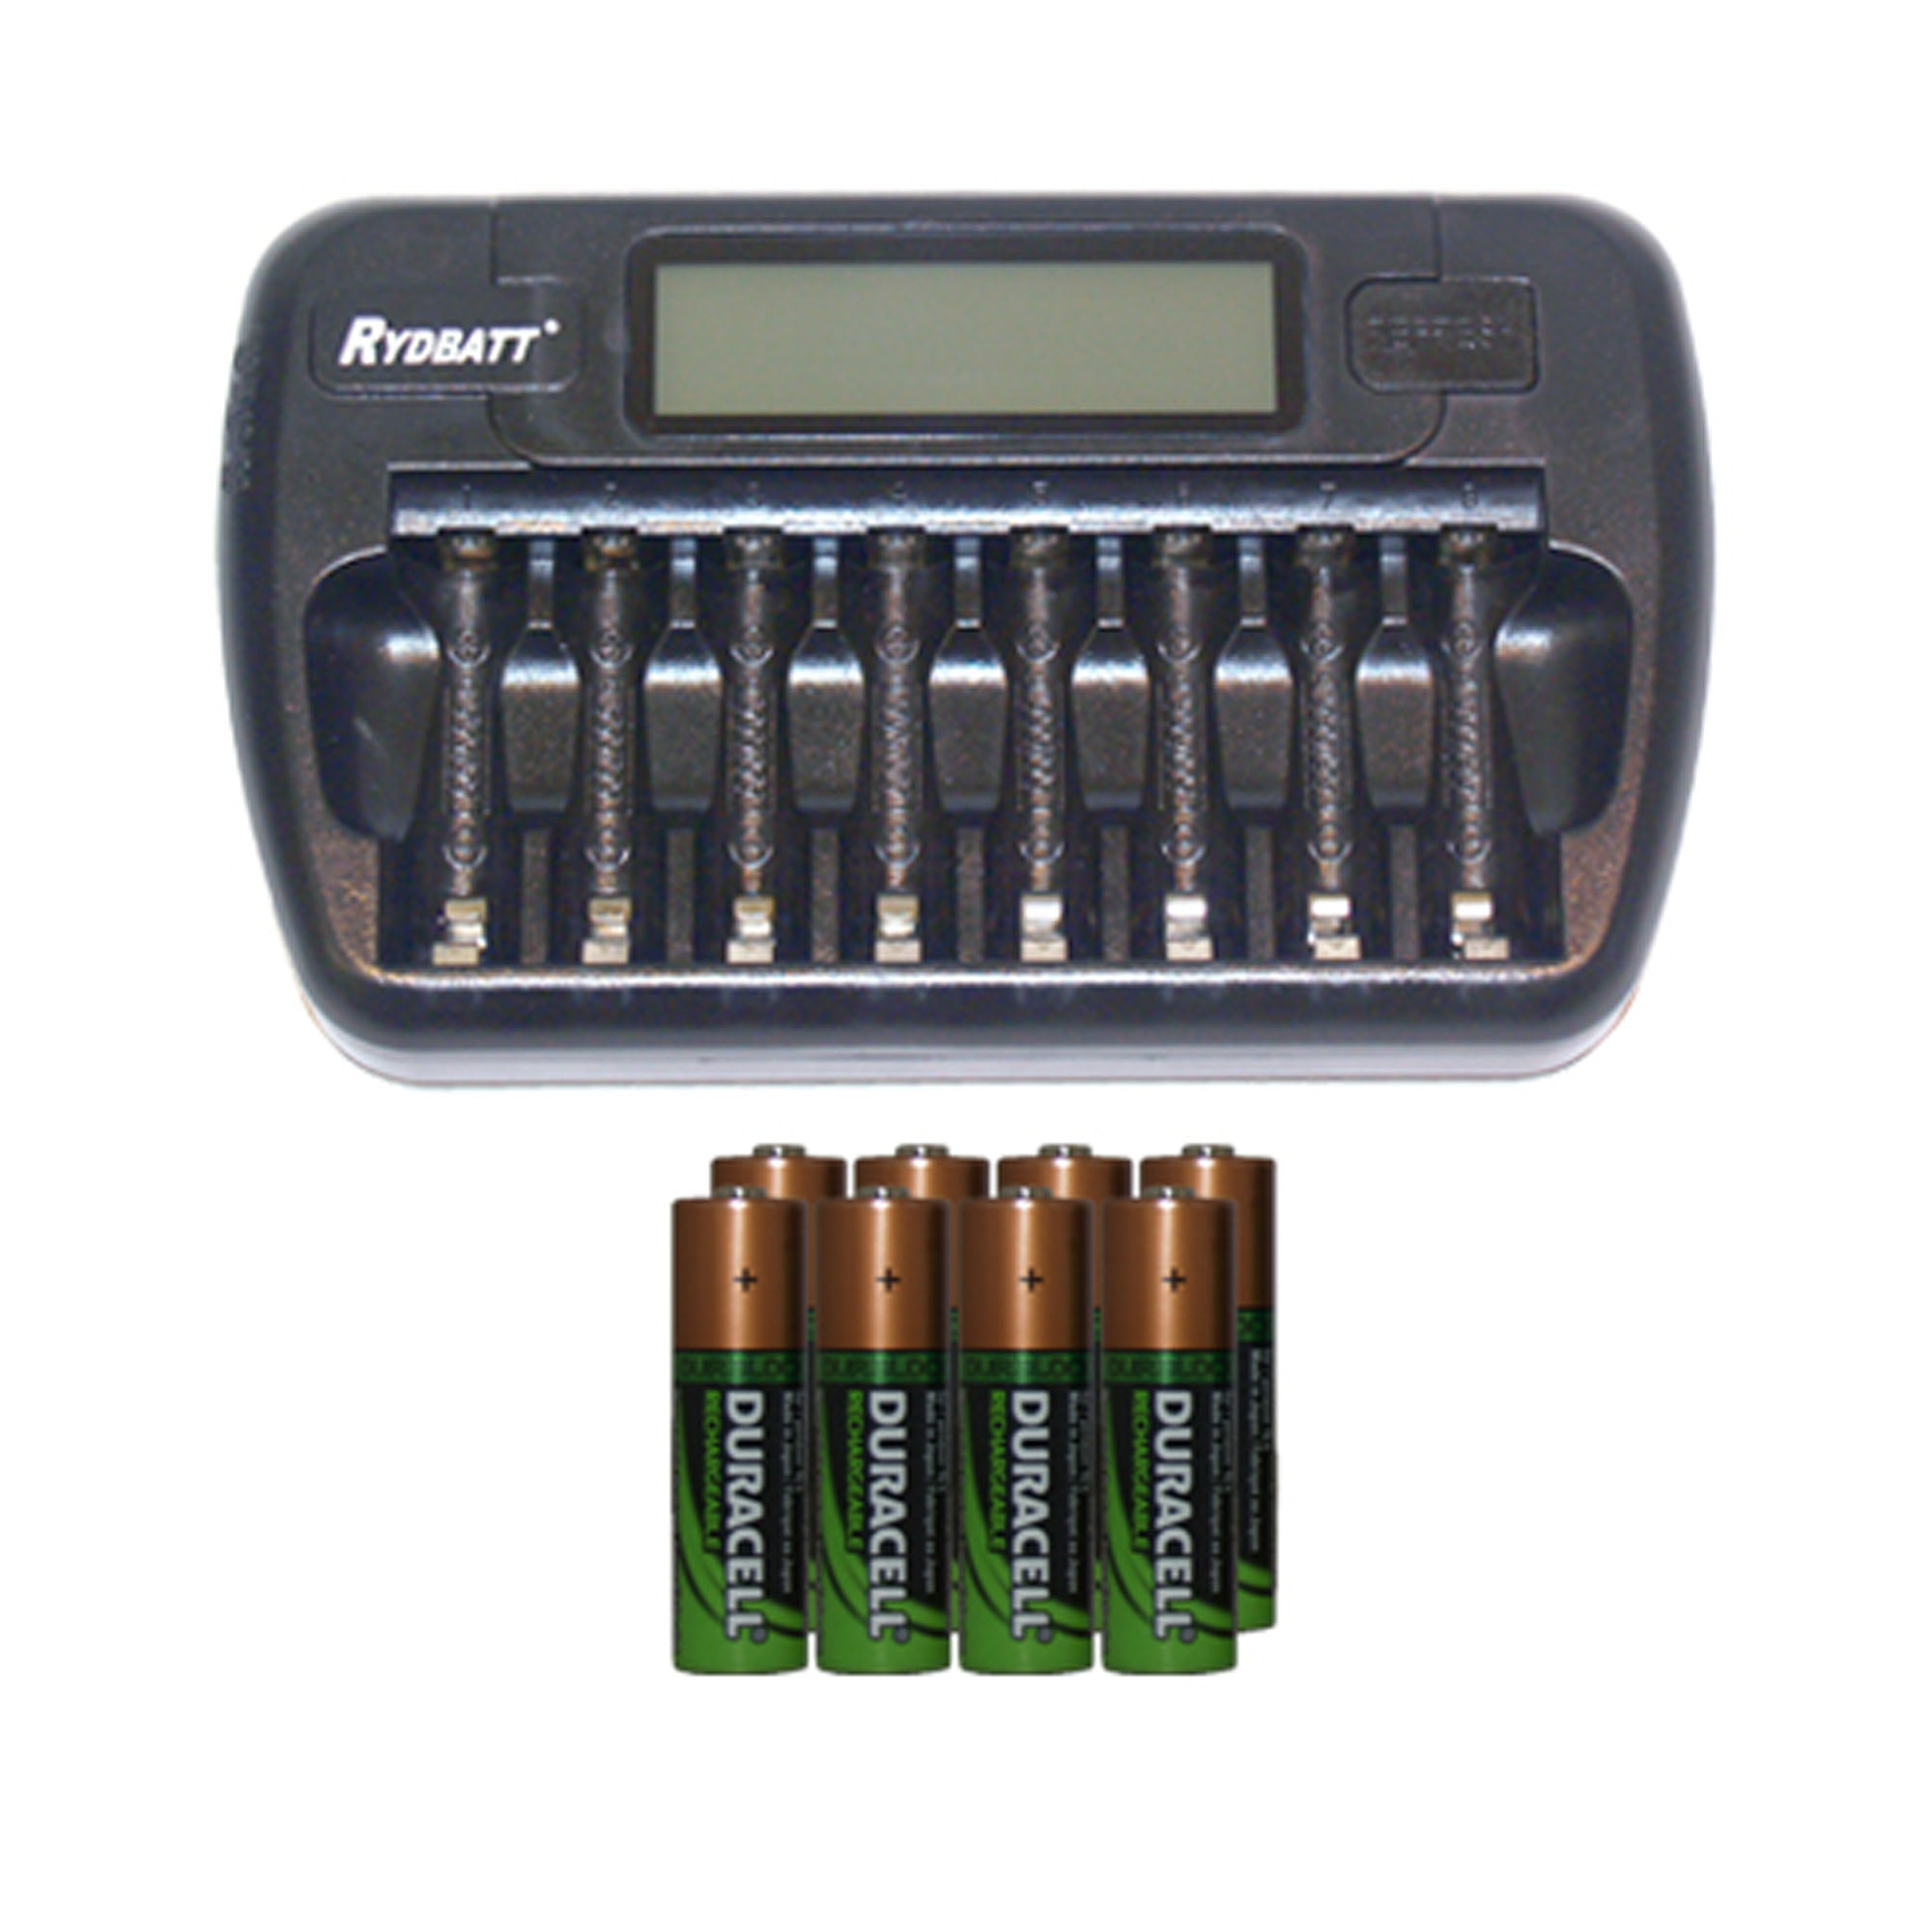 Aa battery recharger